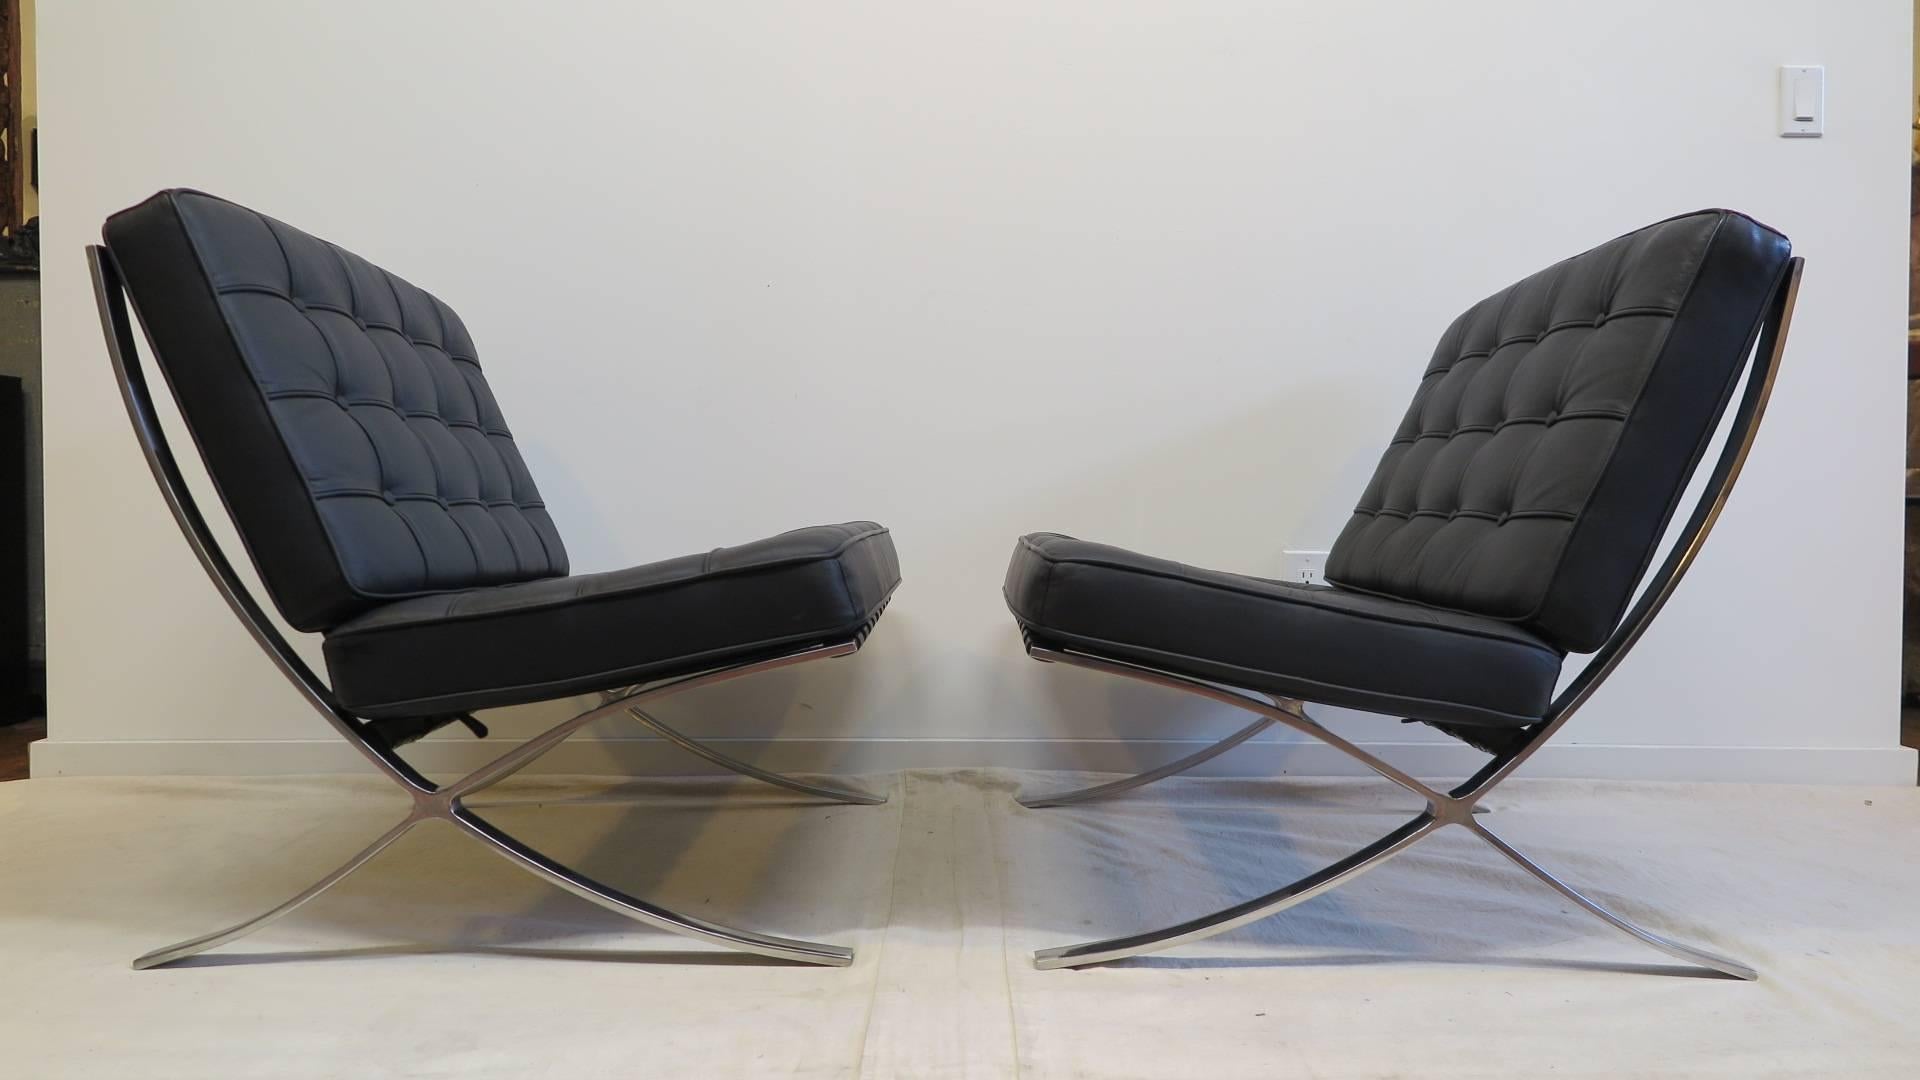 A pair of black leather Barcelona style chairs. Very high quality replica reproductions in excellent condition. 
Order date 2004, from a NYC executive office. A very good buy. Excellent condition.